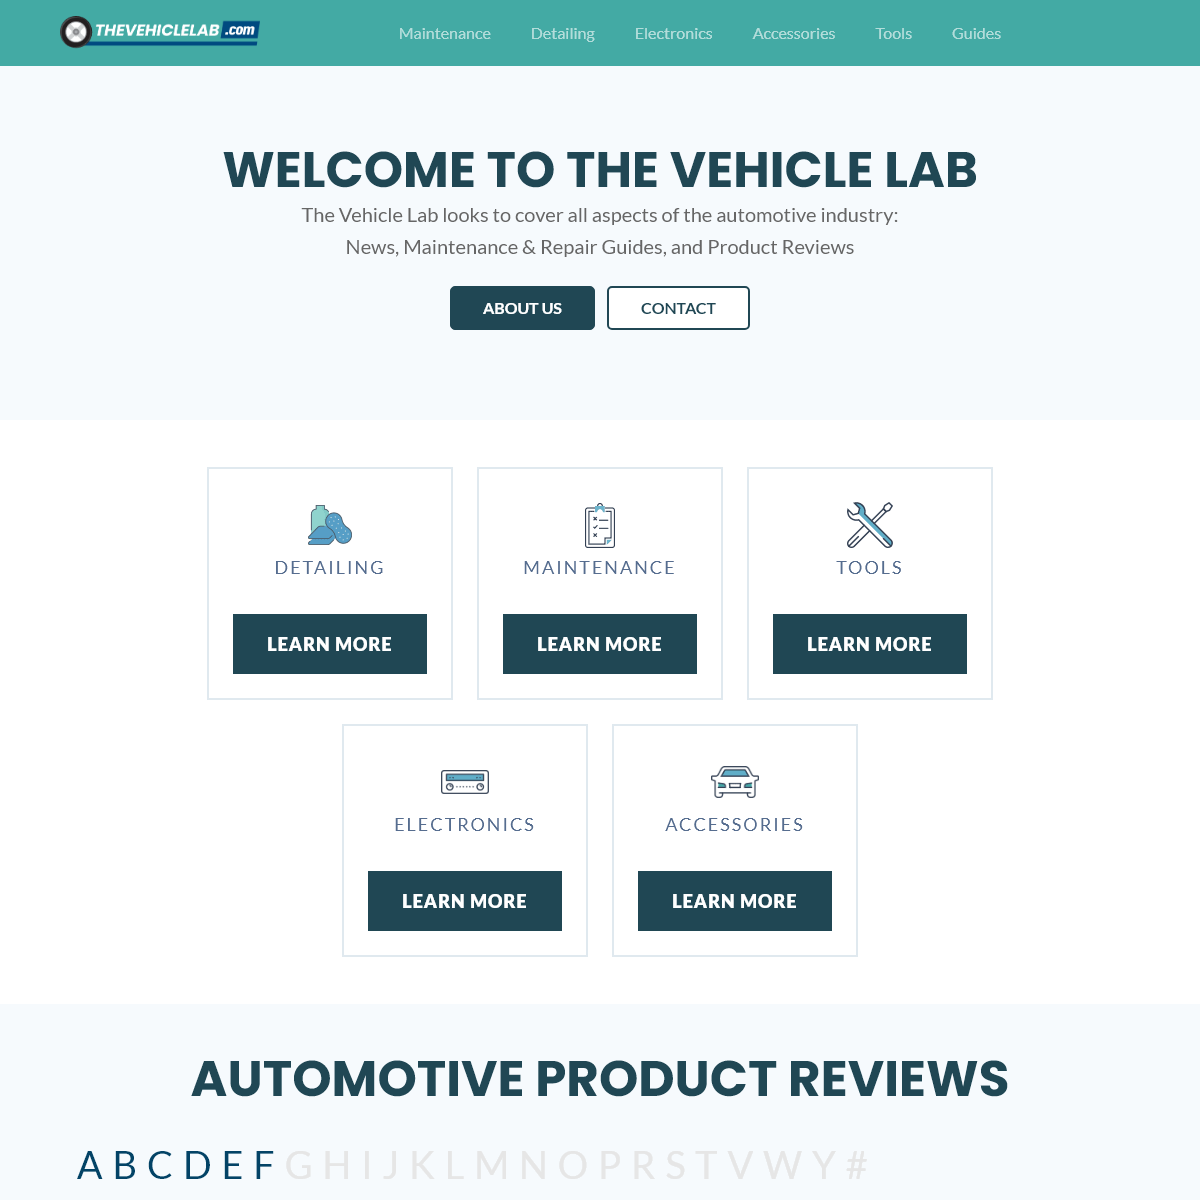 A complete backup of thevehiclelab.com